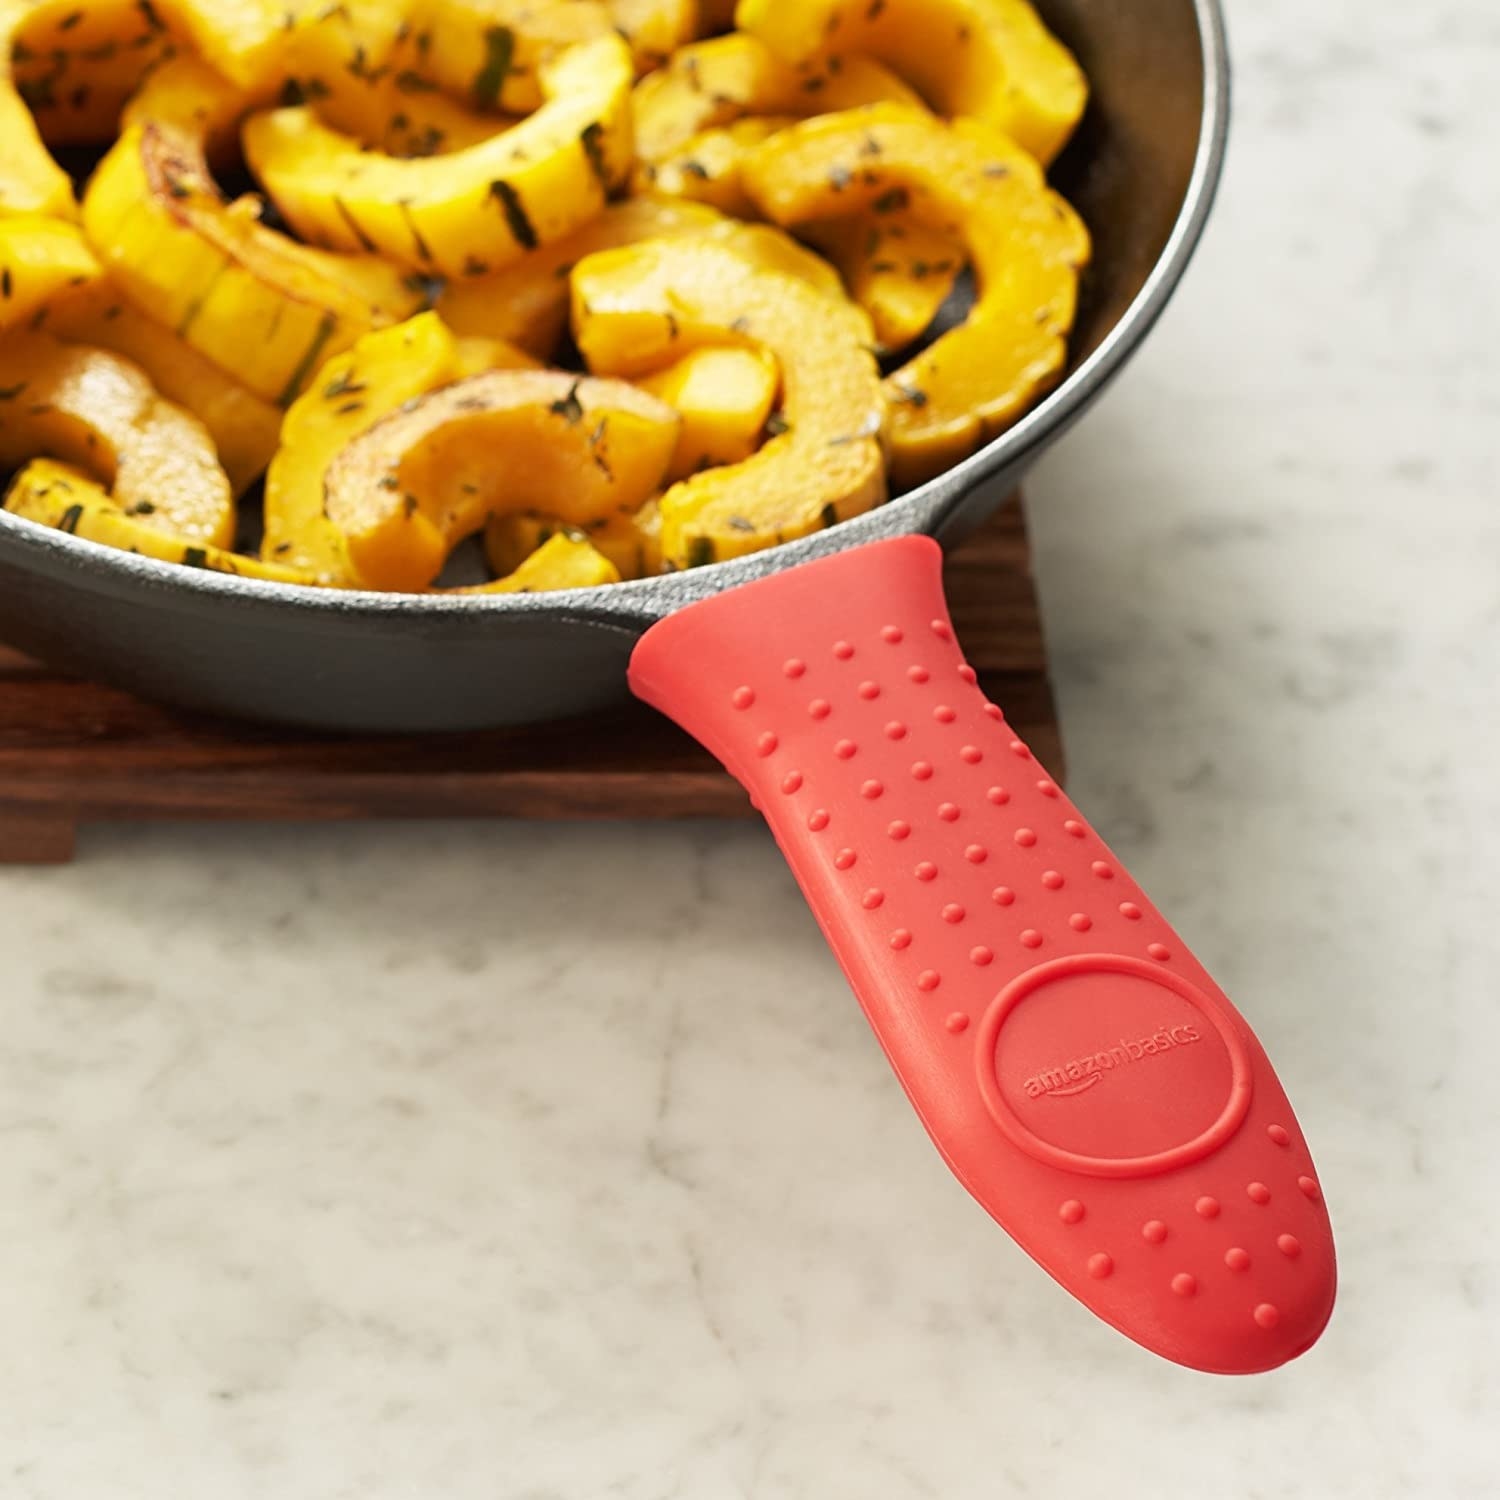 A silicone handle cover over a pan handle